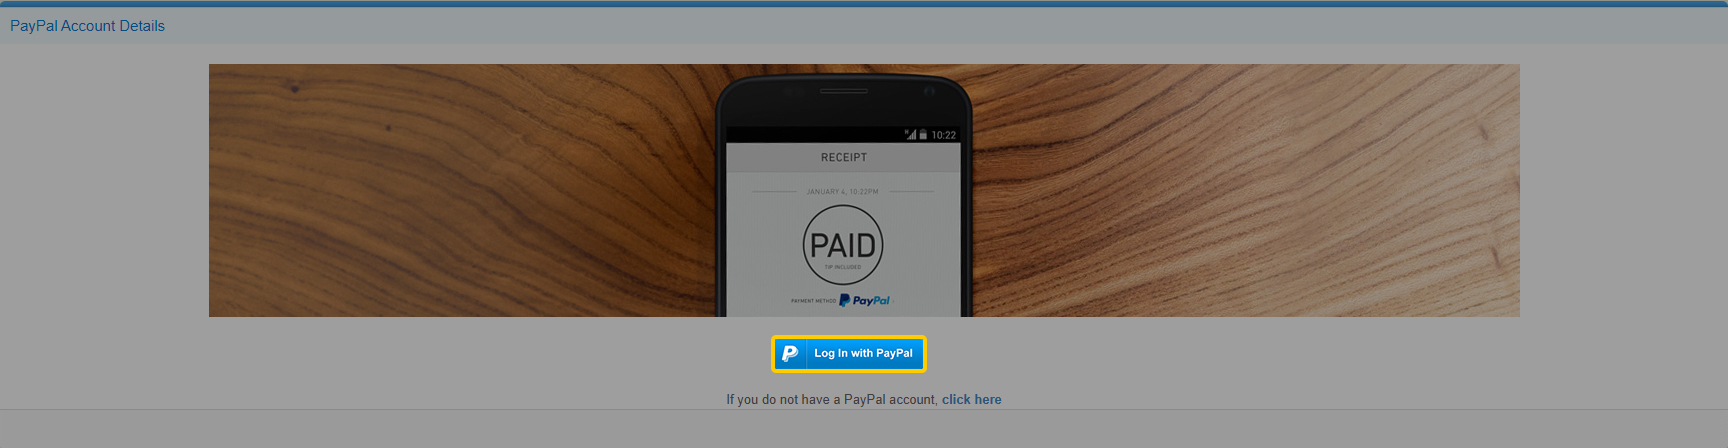 42.Set_up_your_PayPal_account_2.jpg